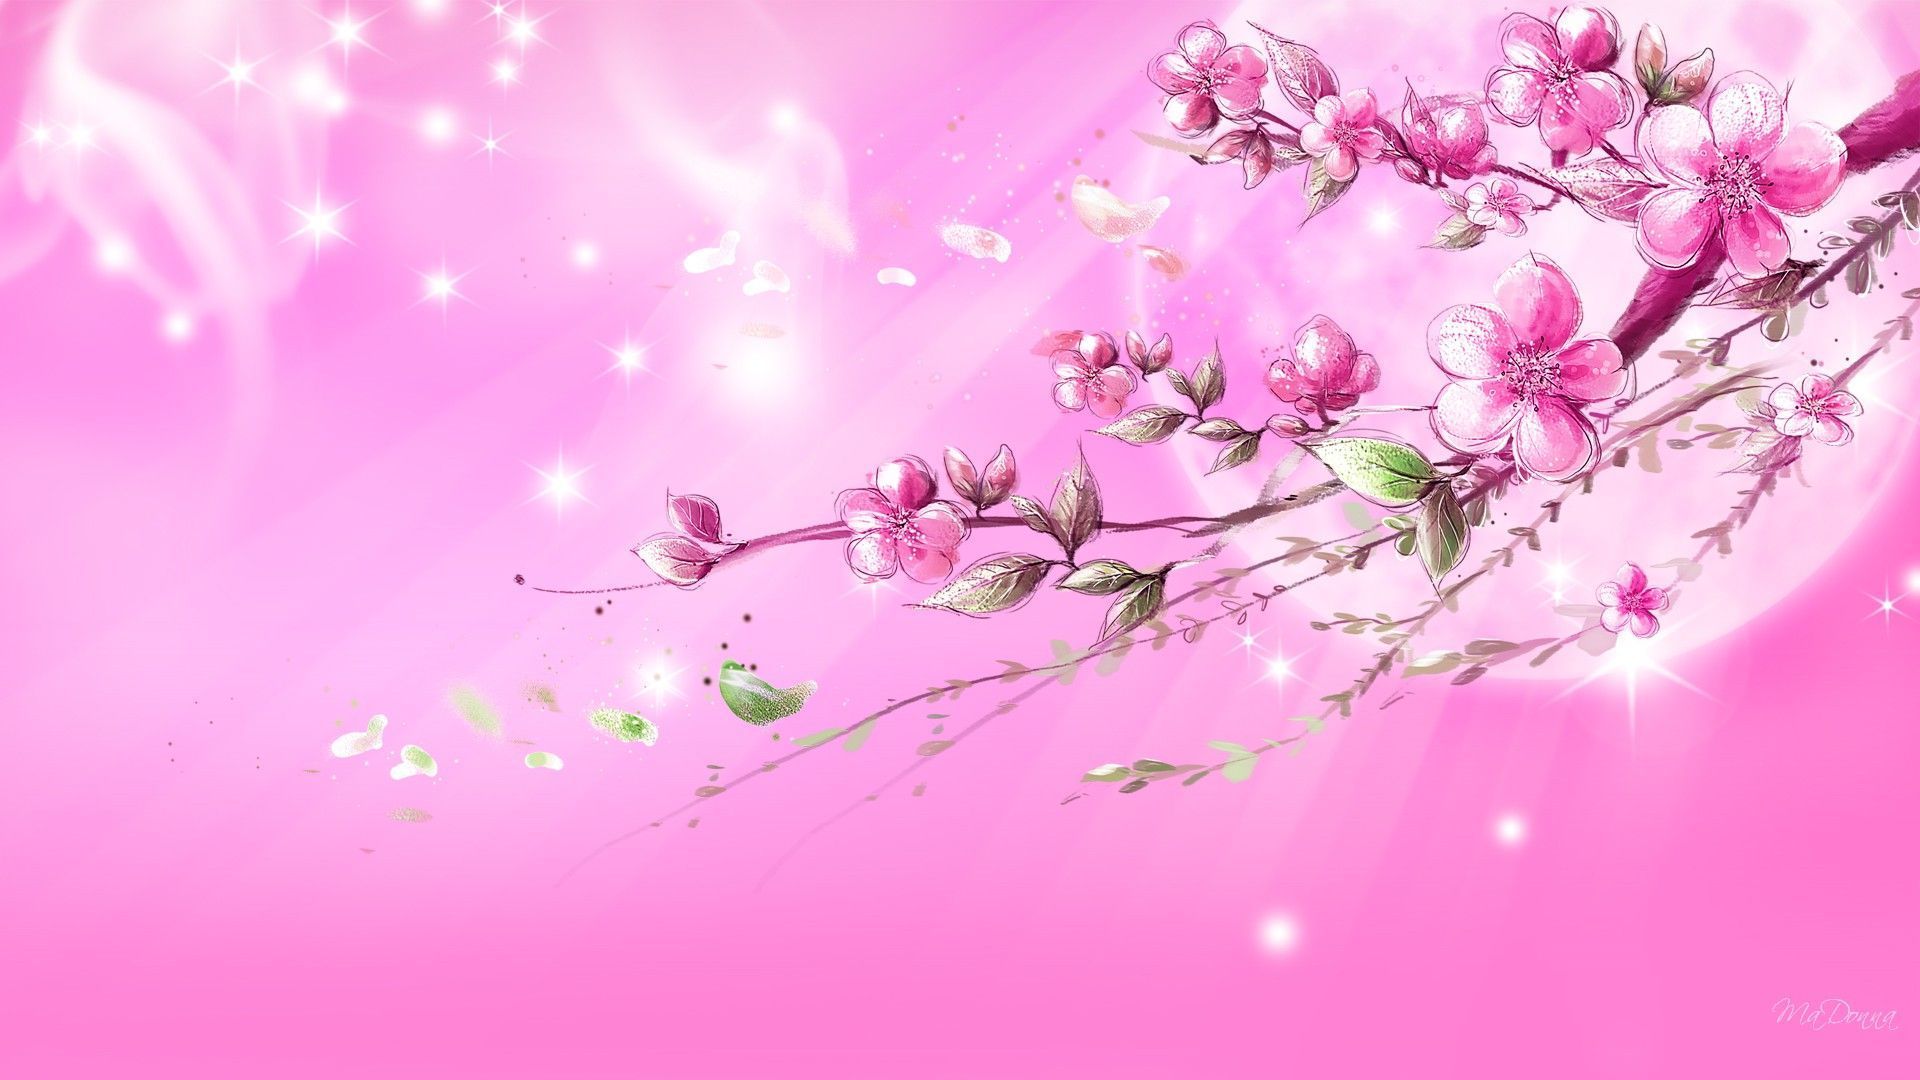 35 High Definition Pink Wallpapers / Backgrounds For Free Download